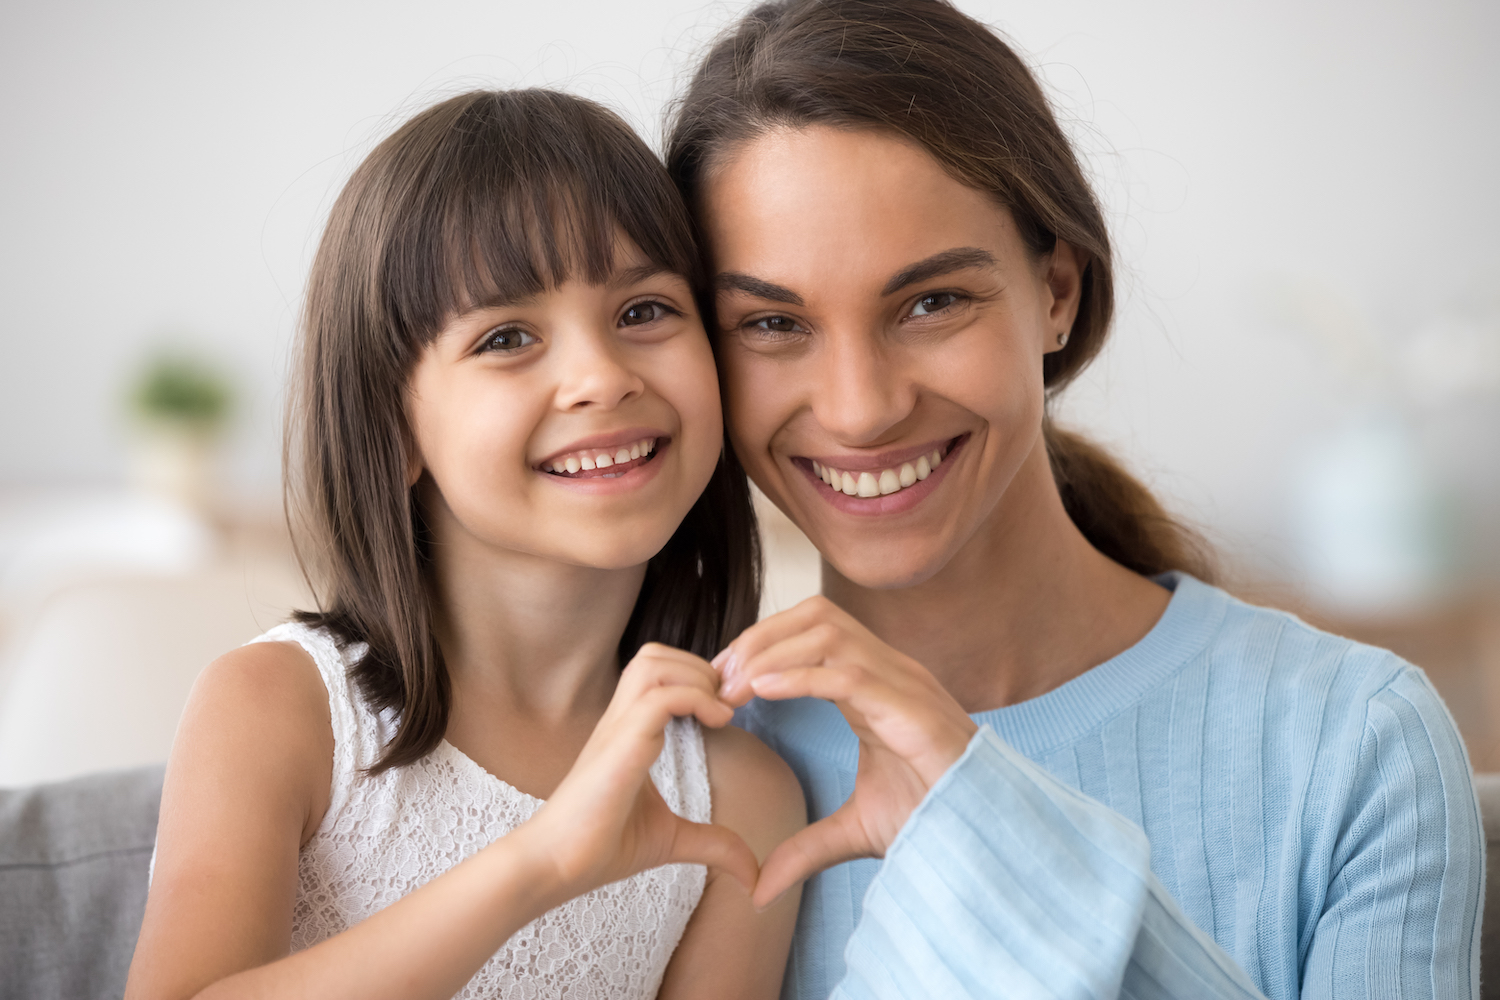 heart health, oral health, oral and heart health, Cute little daughter and happy mother join hands in shape of heart as concept of mom and child love care support, smiling mum and her kid girl looking at camera posing together for headshot portrait